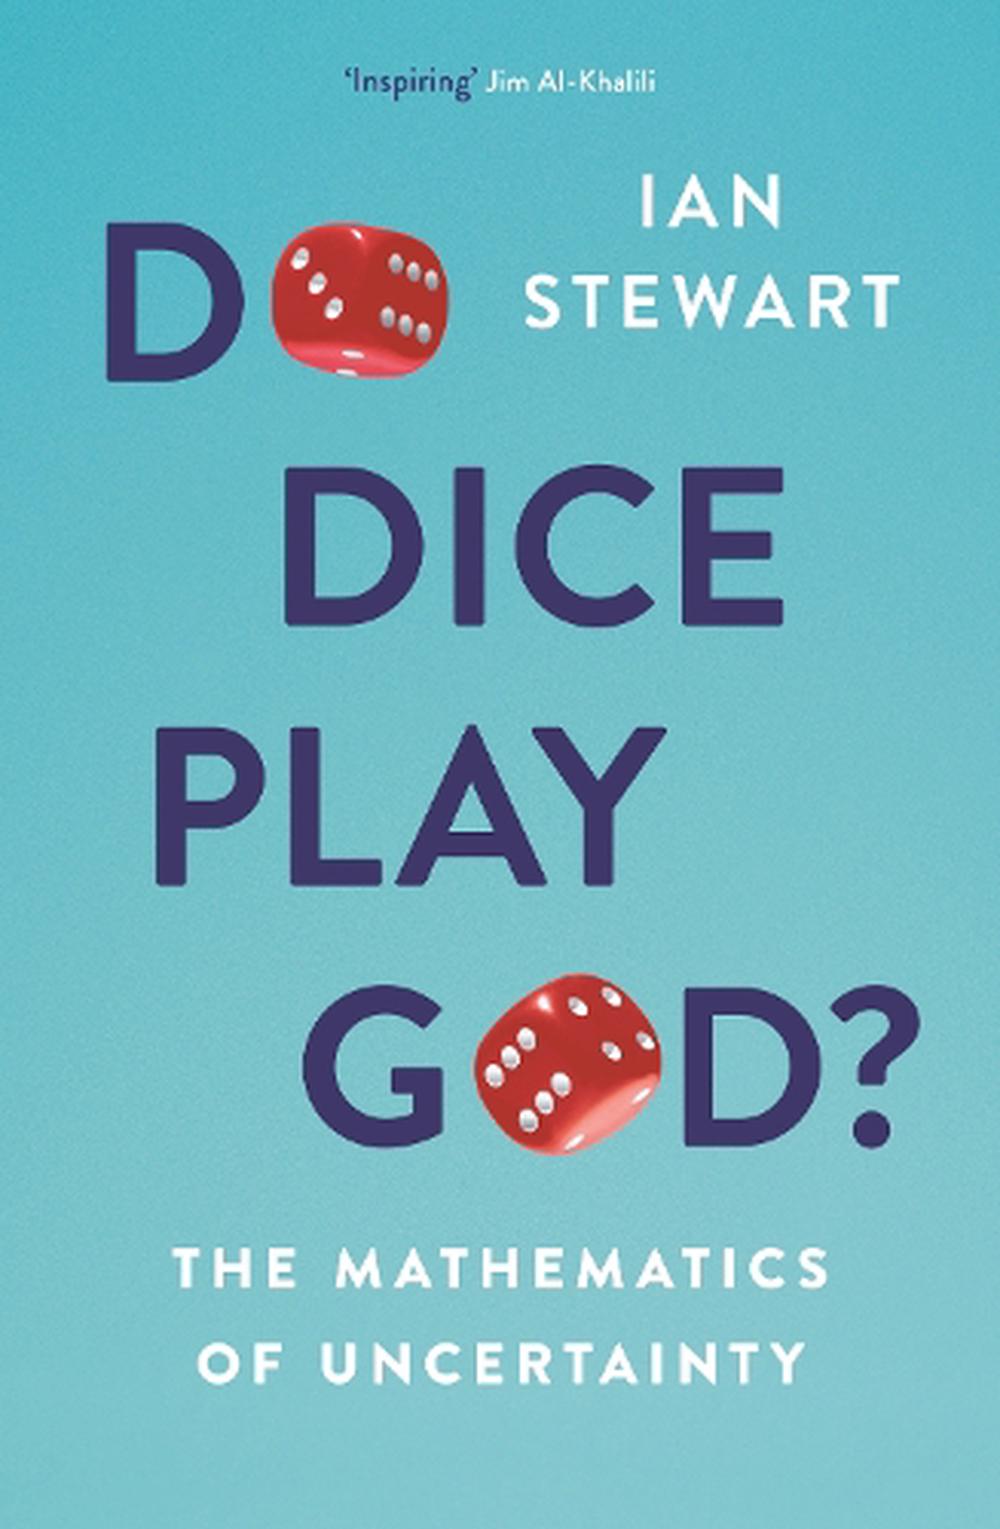 Do Dice Play God? The Mathematics of Uncertainty by Ian Stewart